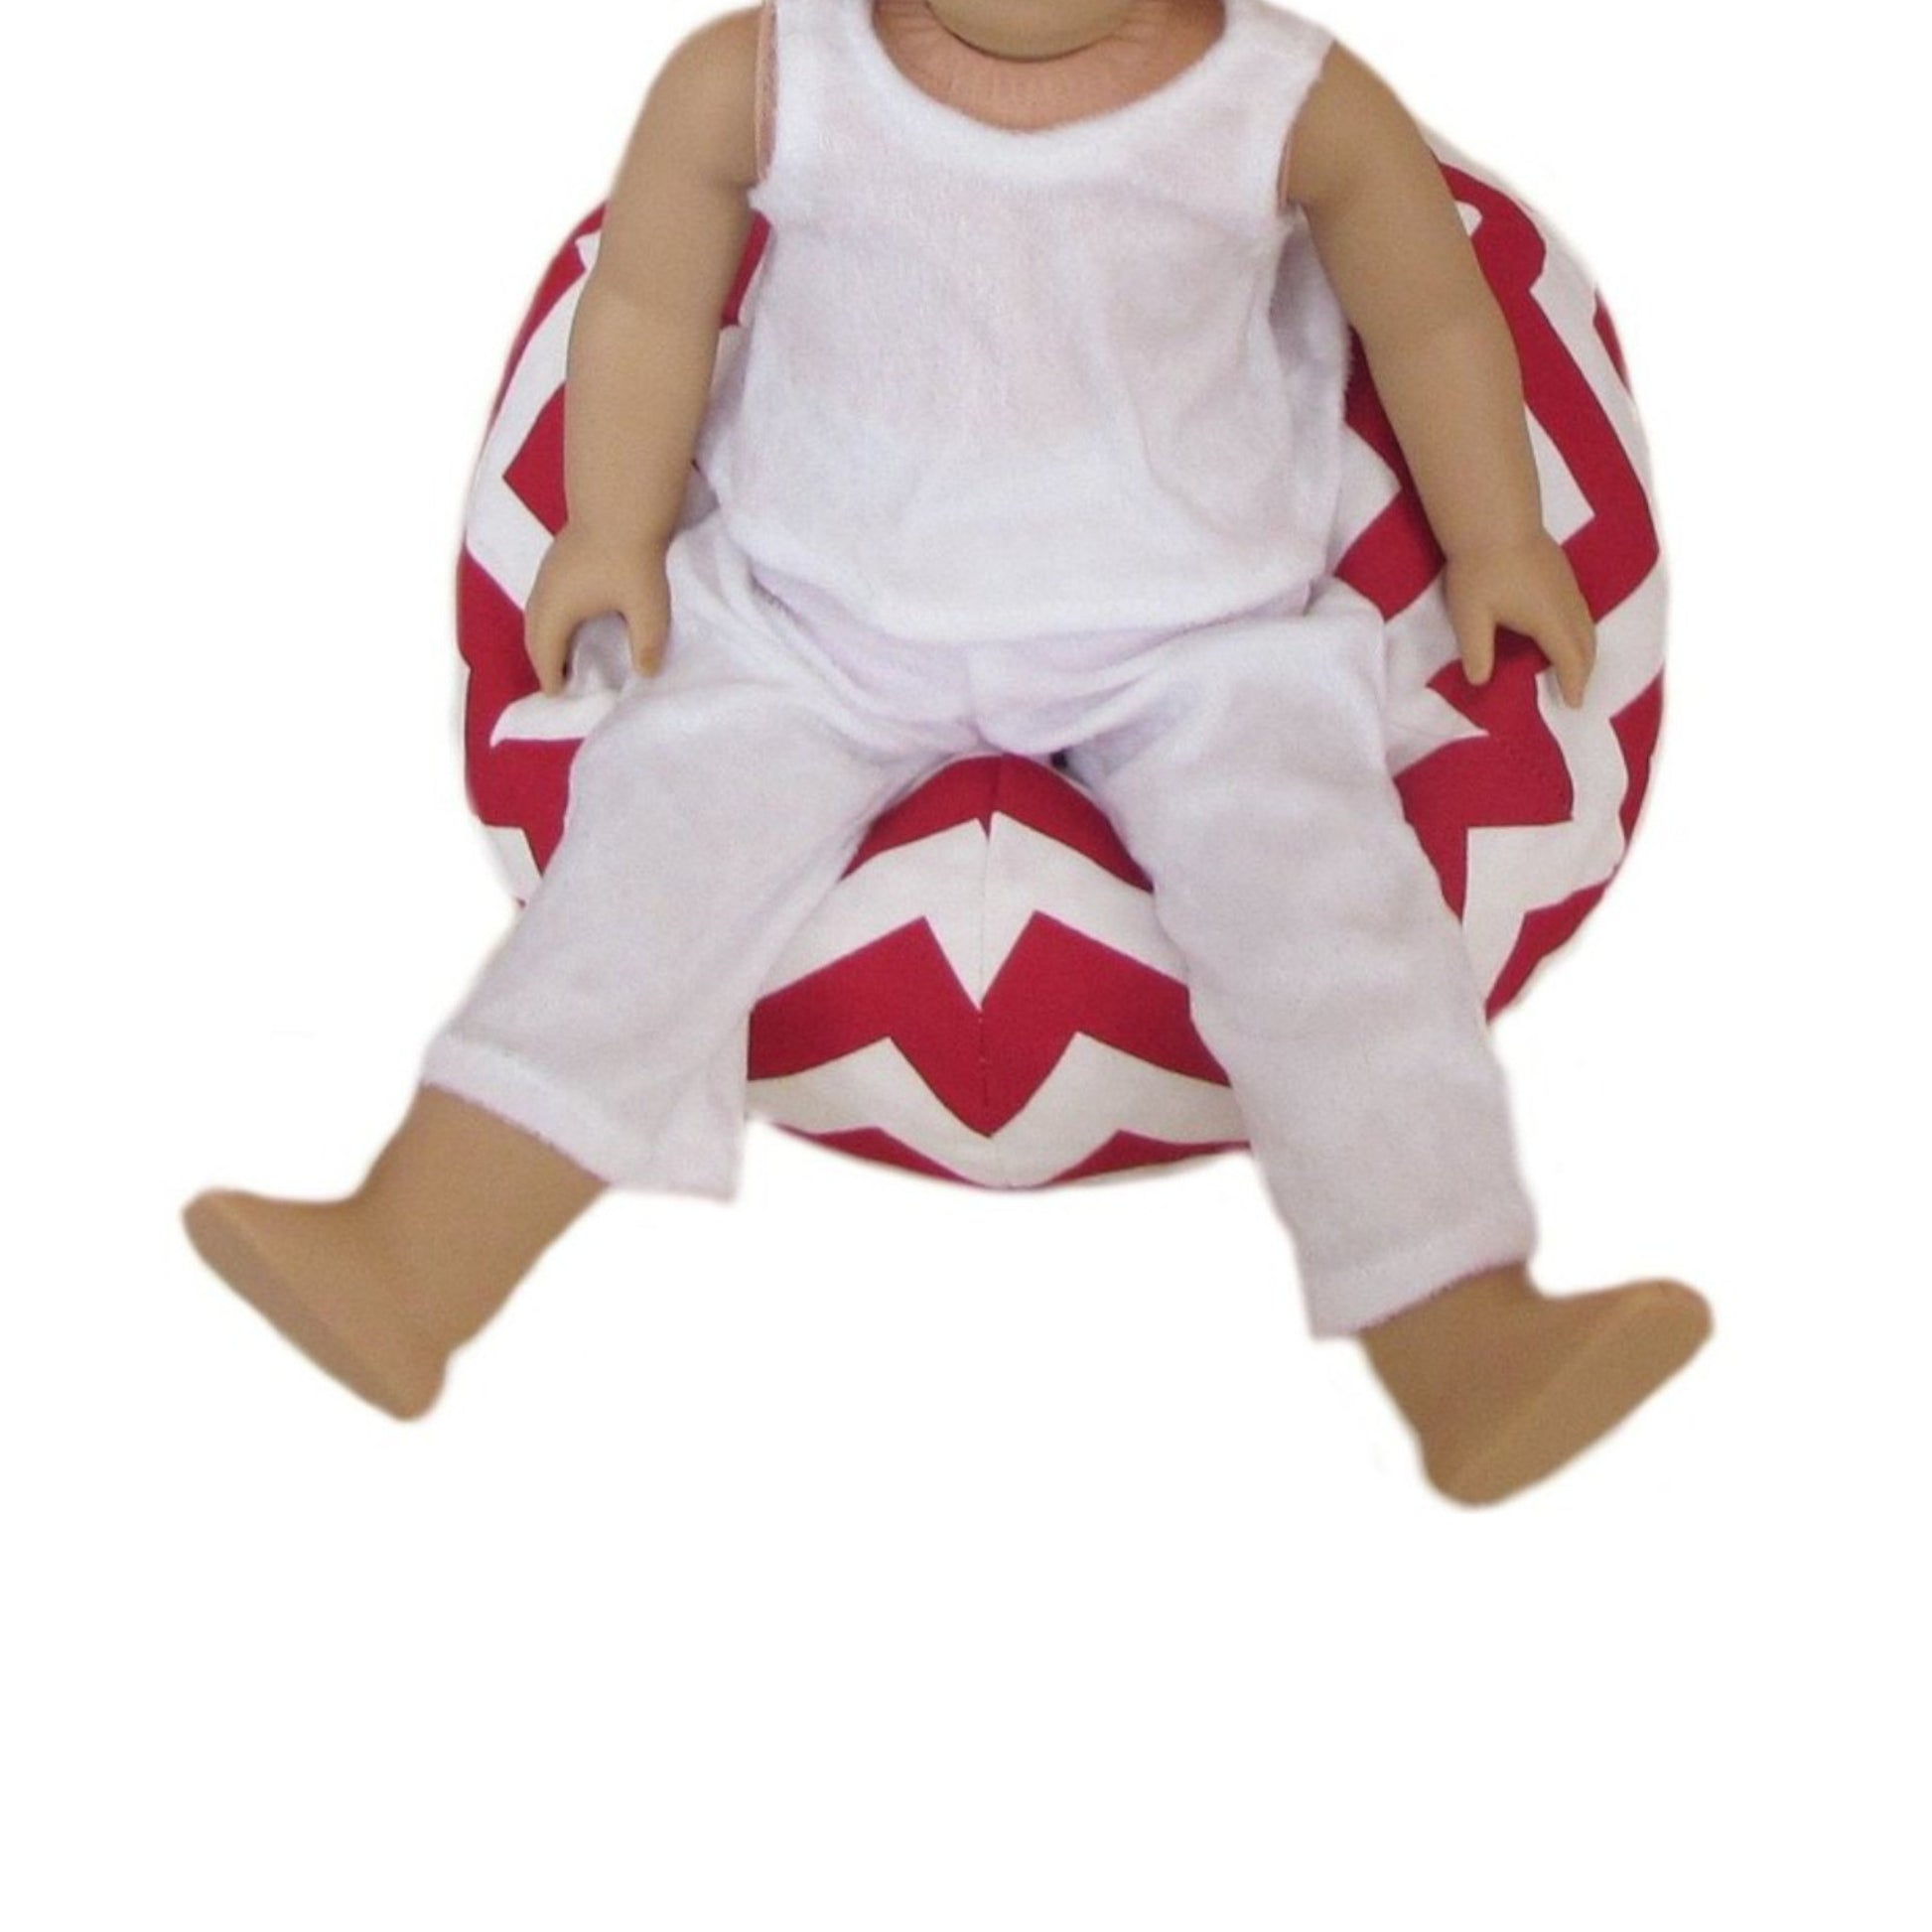 Red Chevron Doll Bean Bag Chair for 18-inch dolls with doll